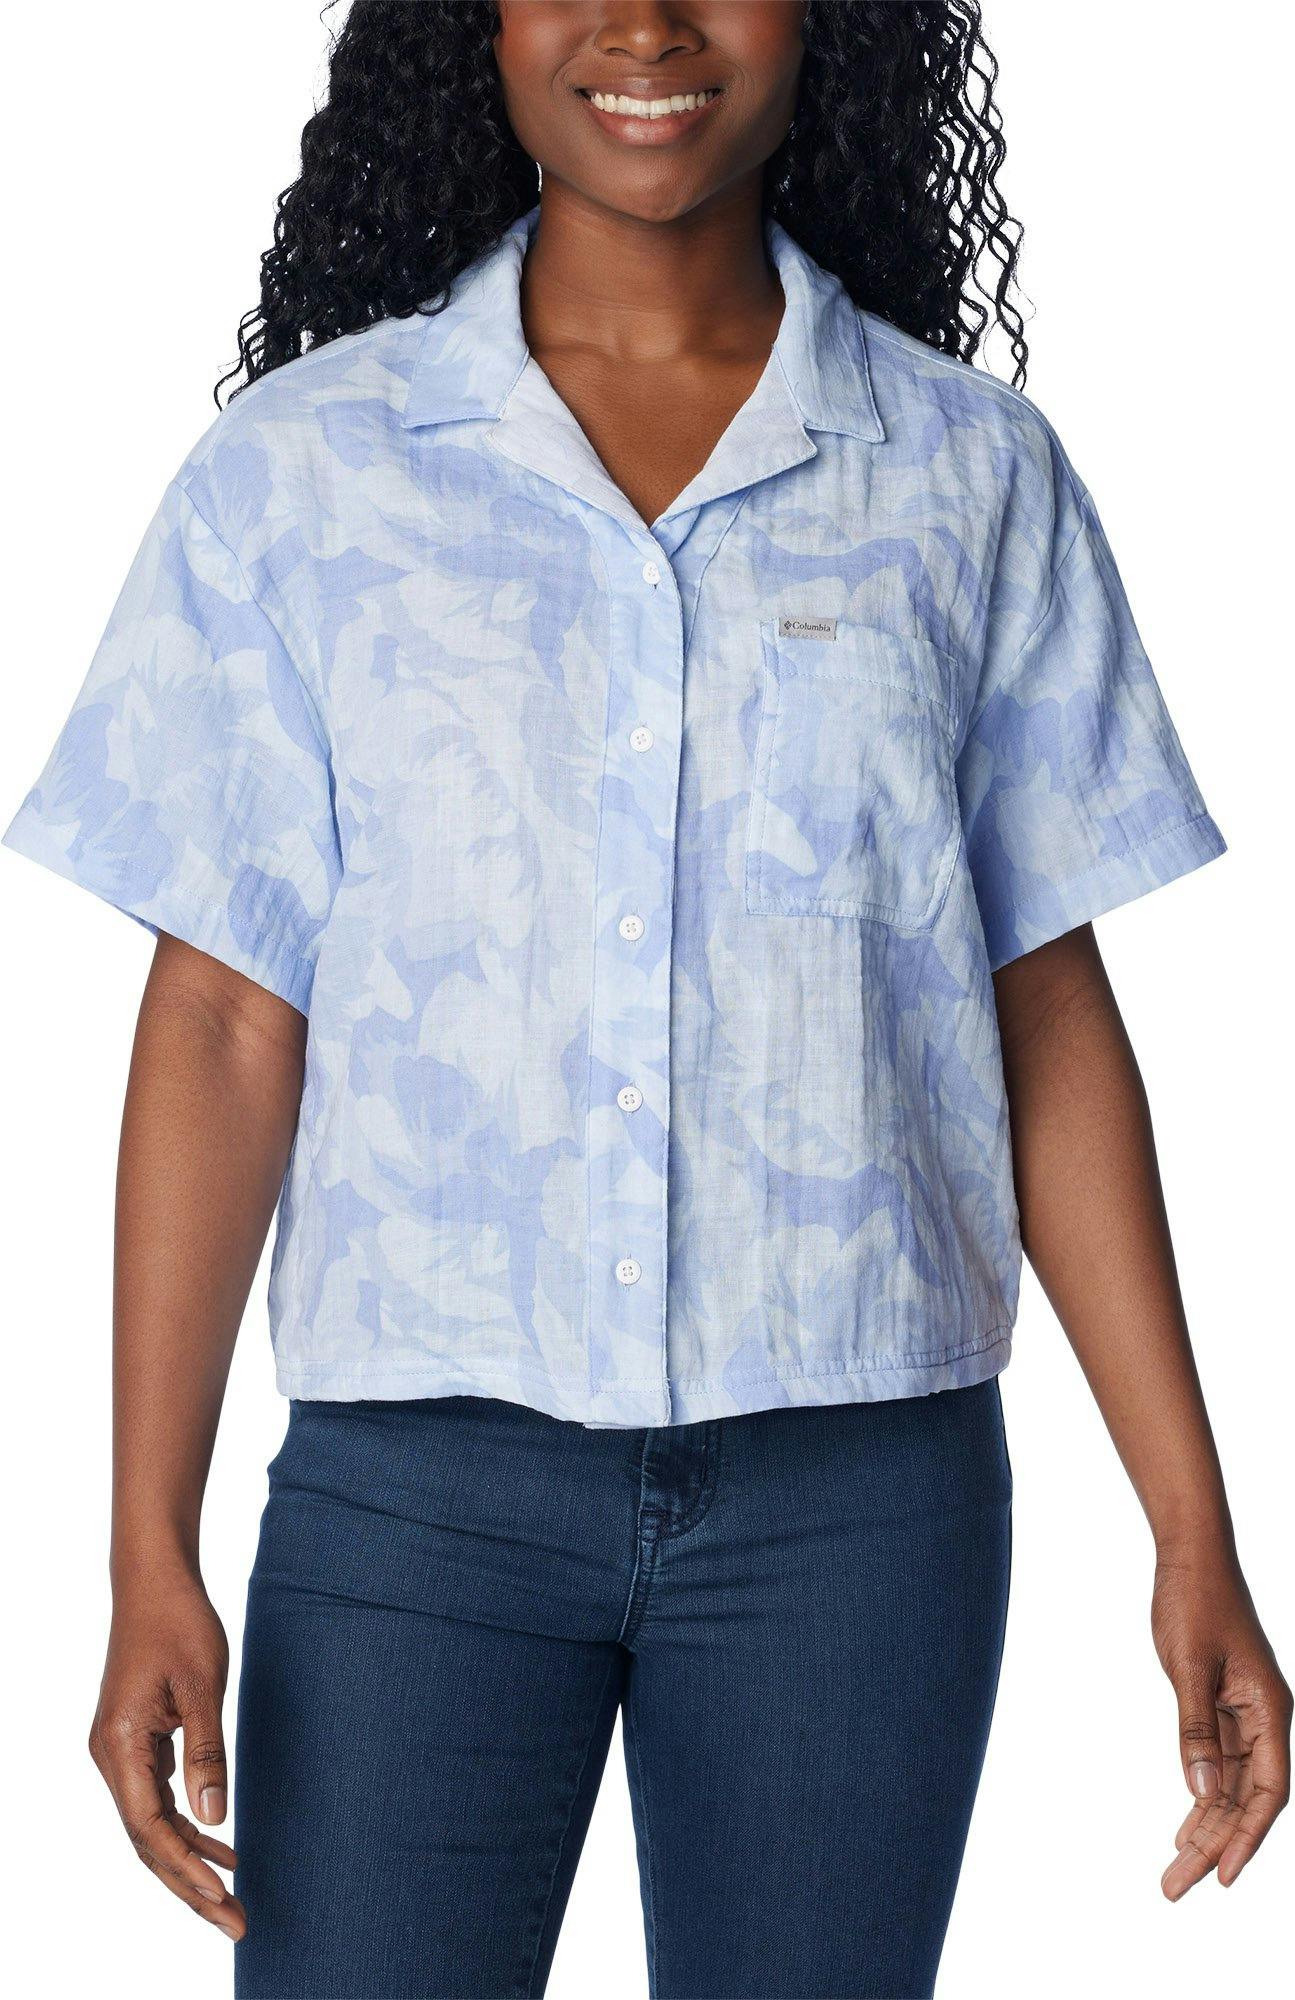 Product image for Holly Hideaway Breezy Top - Women's